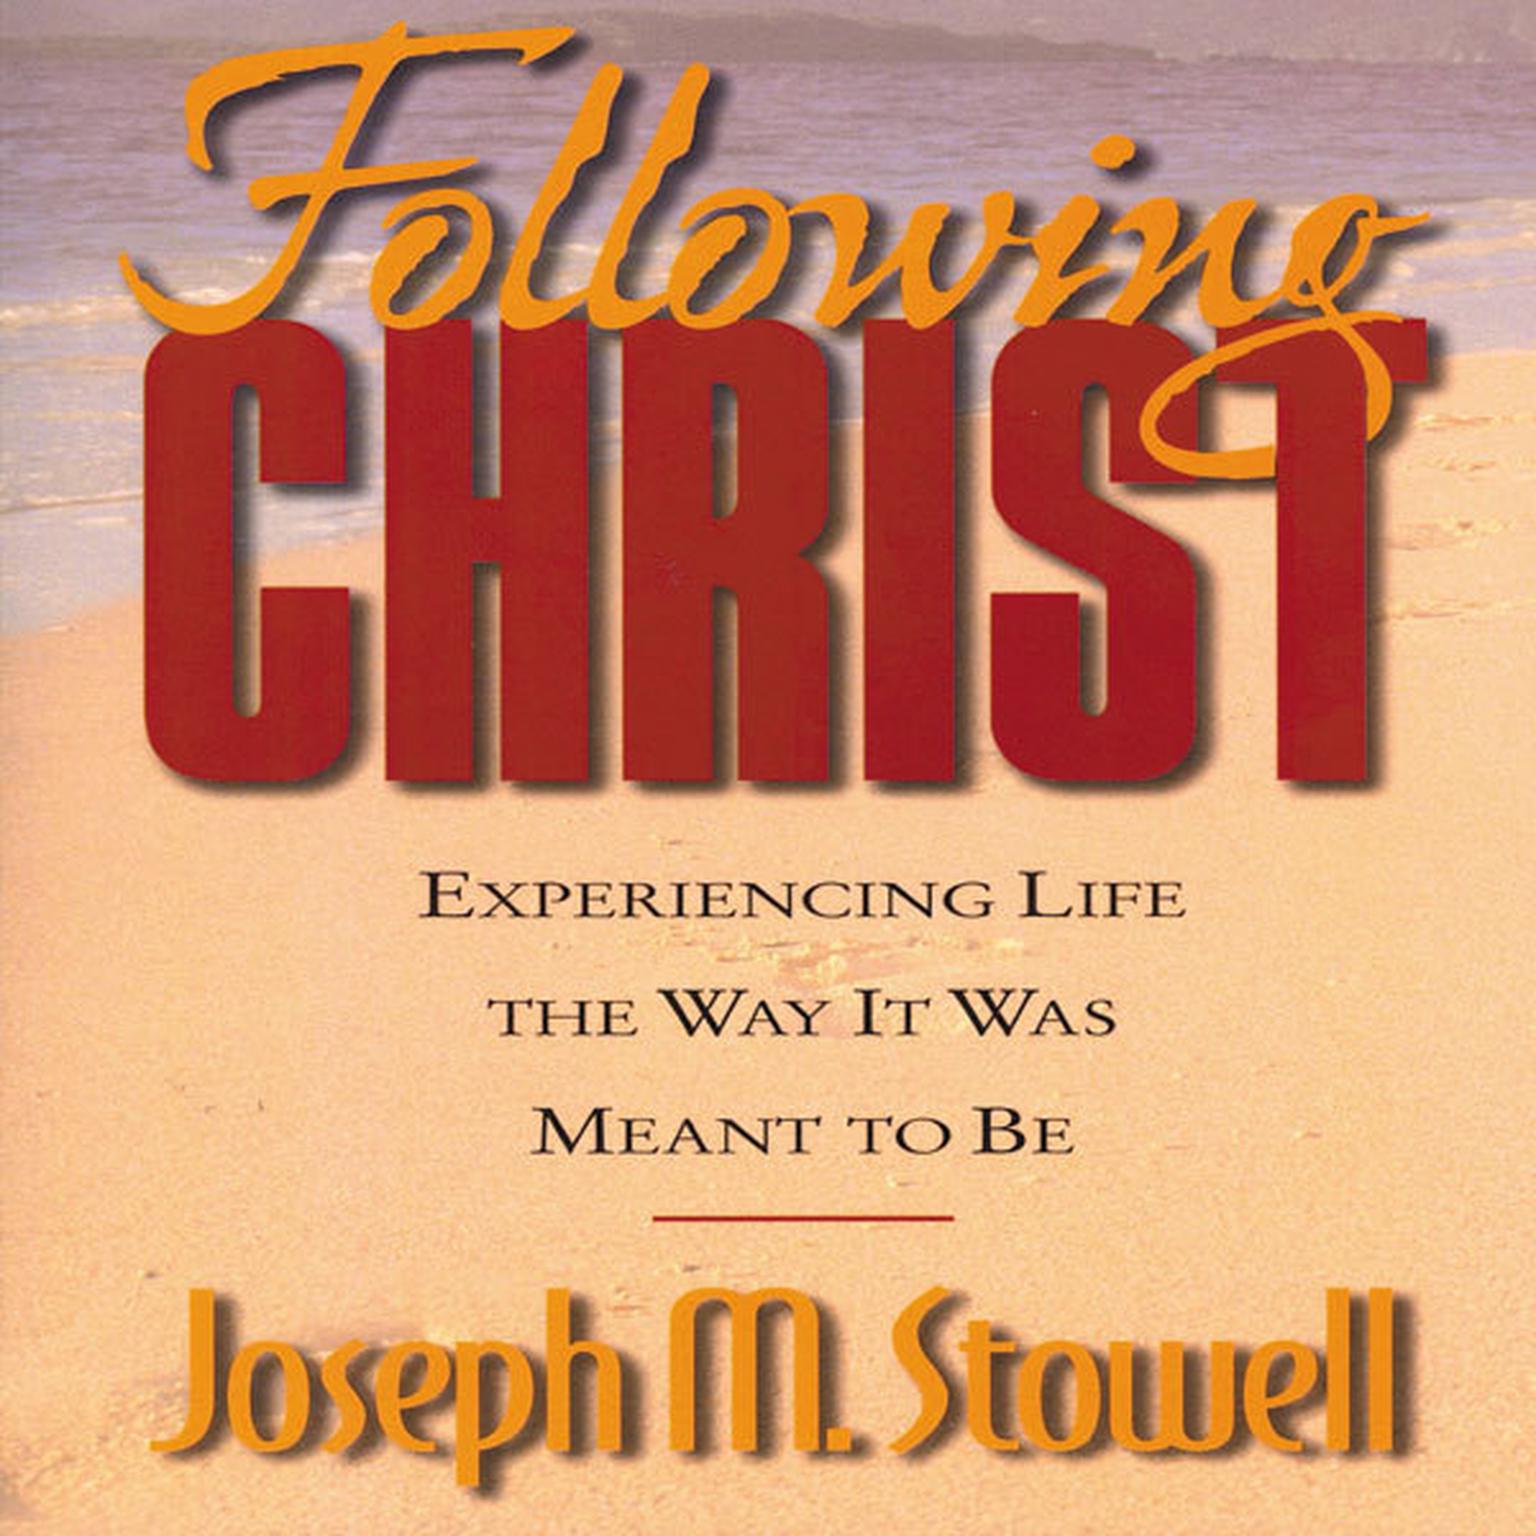 Following Christ (Abridged): Experiencing Life in the Way It Was Meant to Be Audiobook, by Joseph M. Stowell